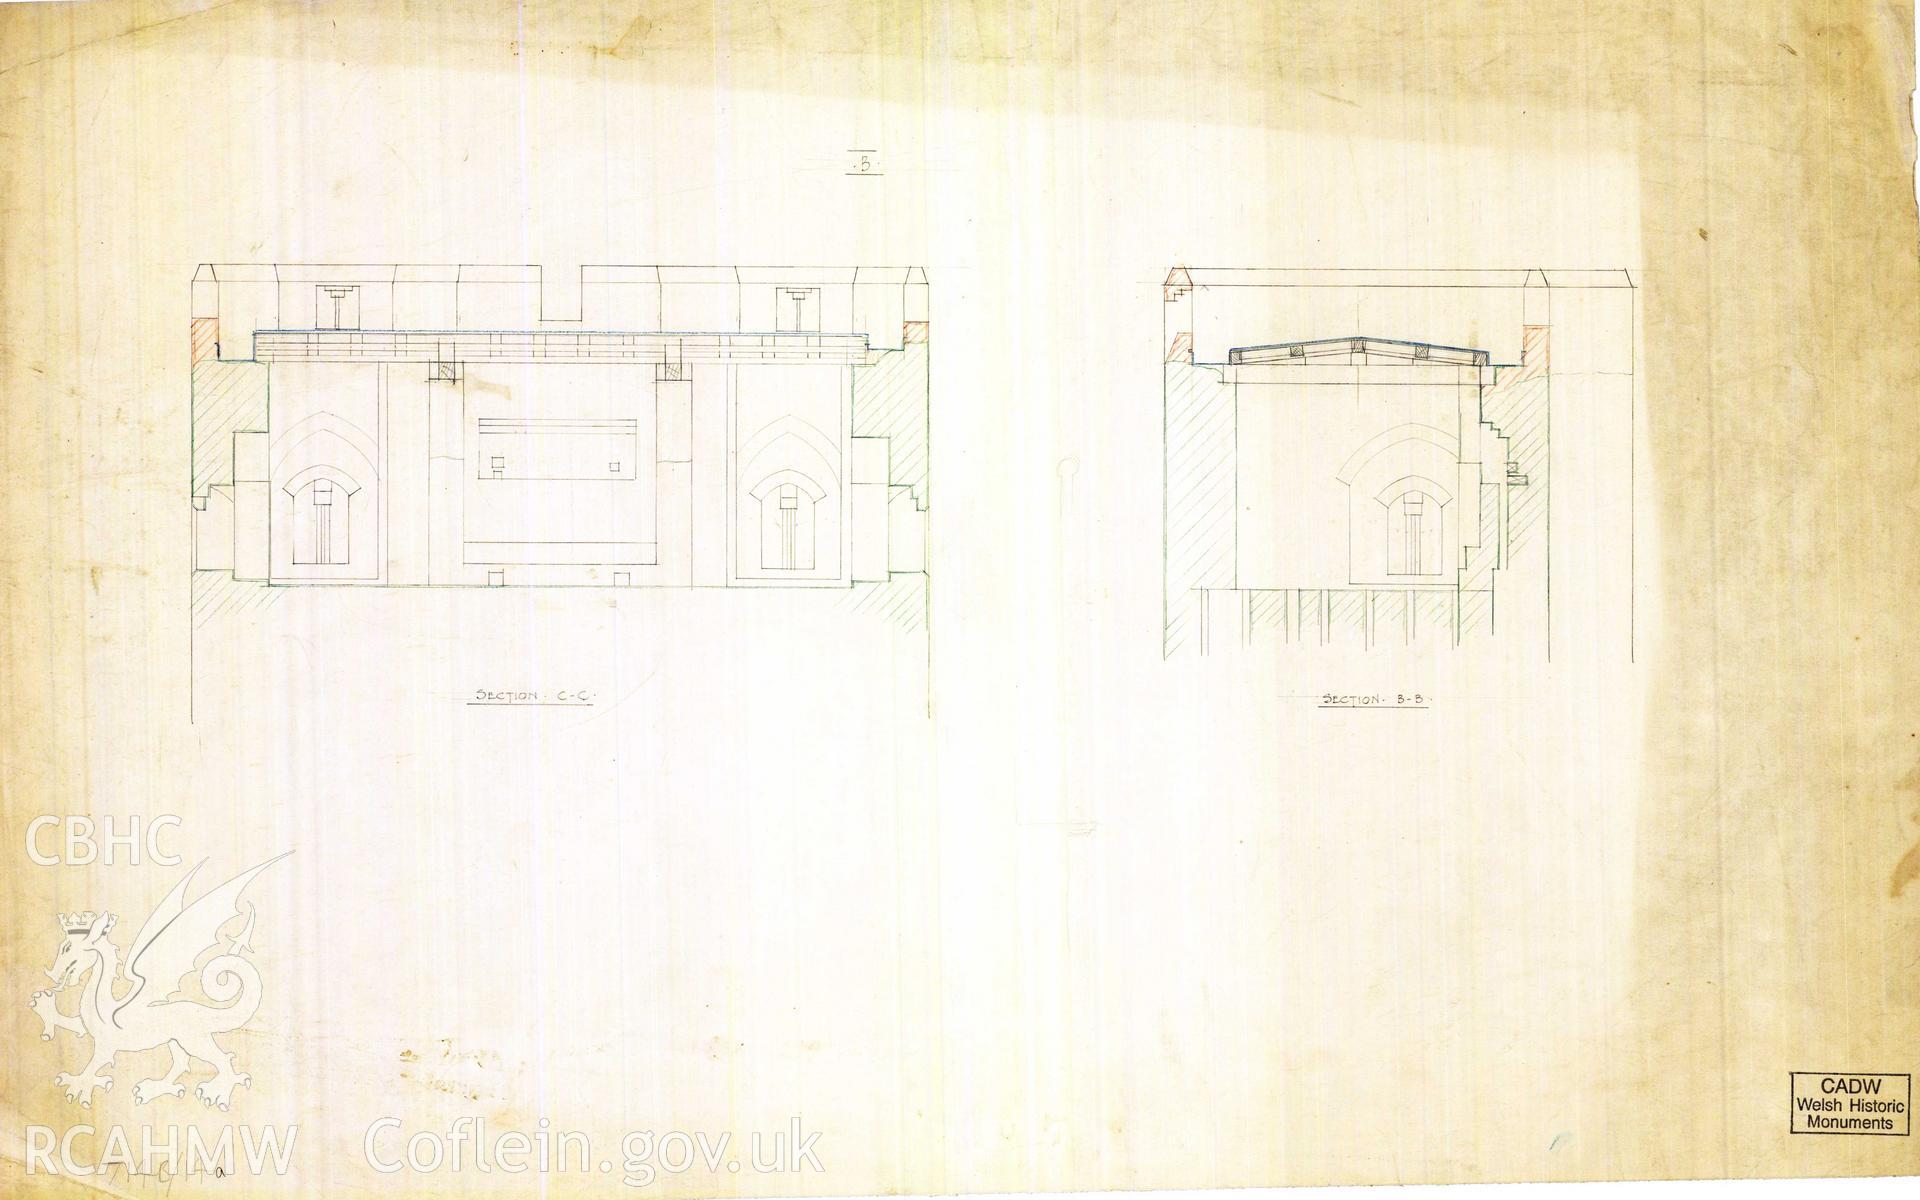 Digital copy of Cadw guardianship monument drawing of Caerphilly Castle. Outer E gate, upper int elevs (i). Cadw ref. no: 714B/14a. Scale 1:[48].  Original drawing withdrawn and returned to Cadw at their request.